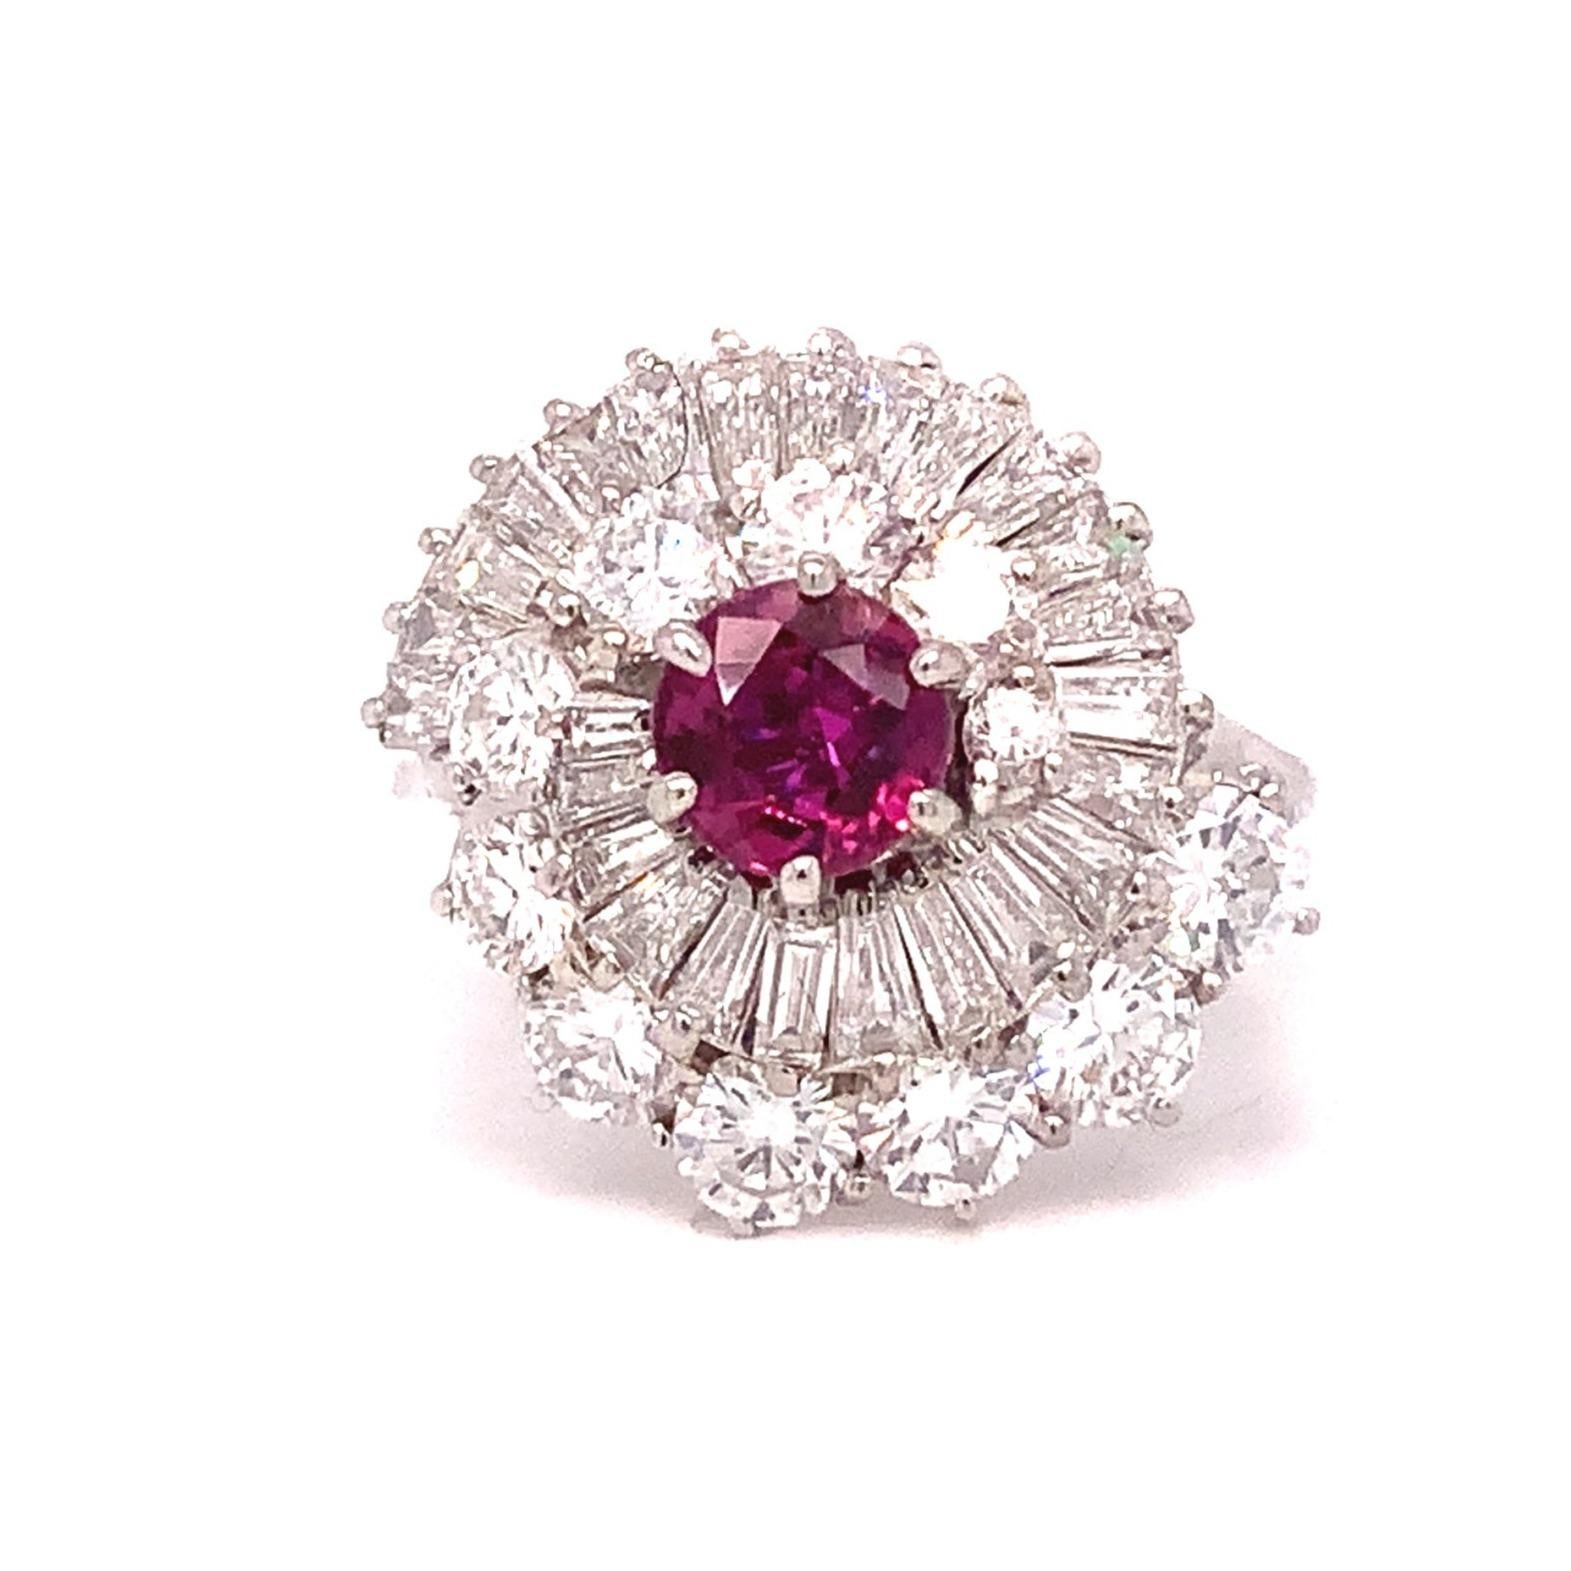 This exquisite Vintage Fine Quality Ruby and Diamond Ballerina Ring Set is crafted in 18 kt white gold and features a striking contrast between the rubies and diamonds for a remarkable look. The classic design of the ring is sure to stand the test